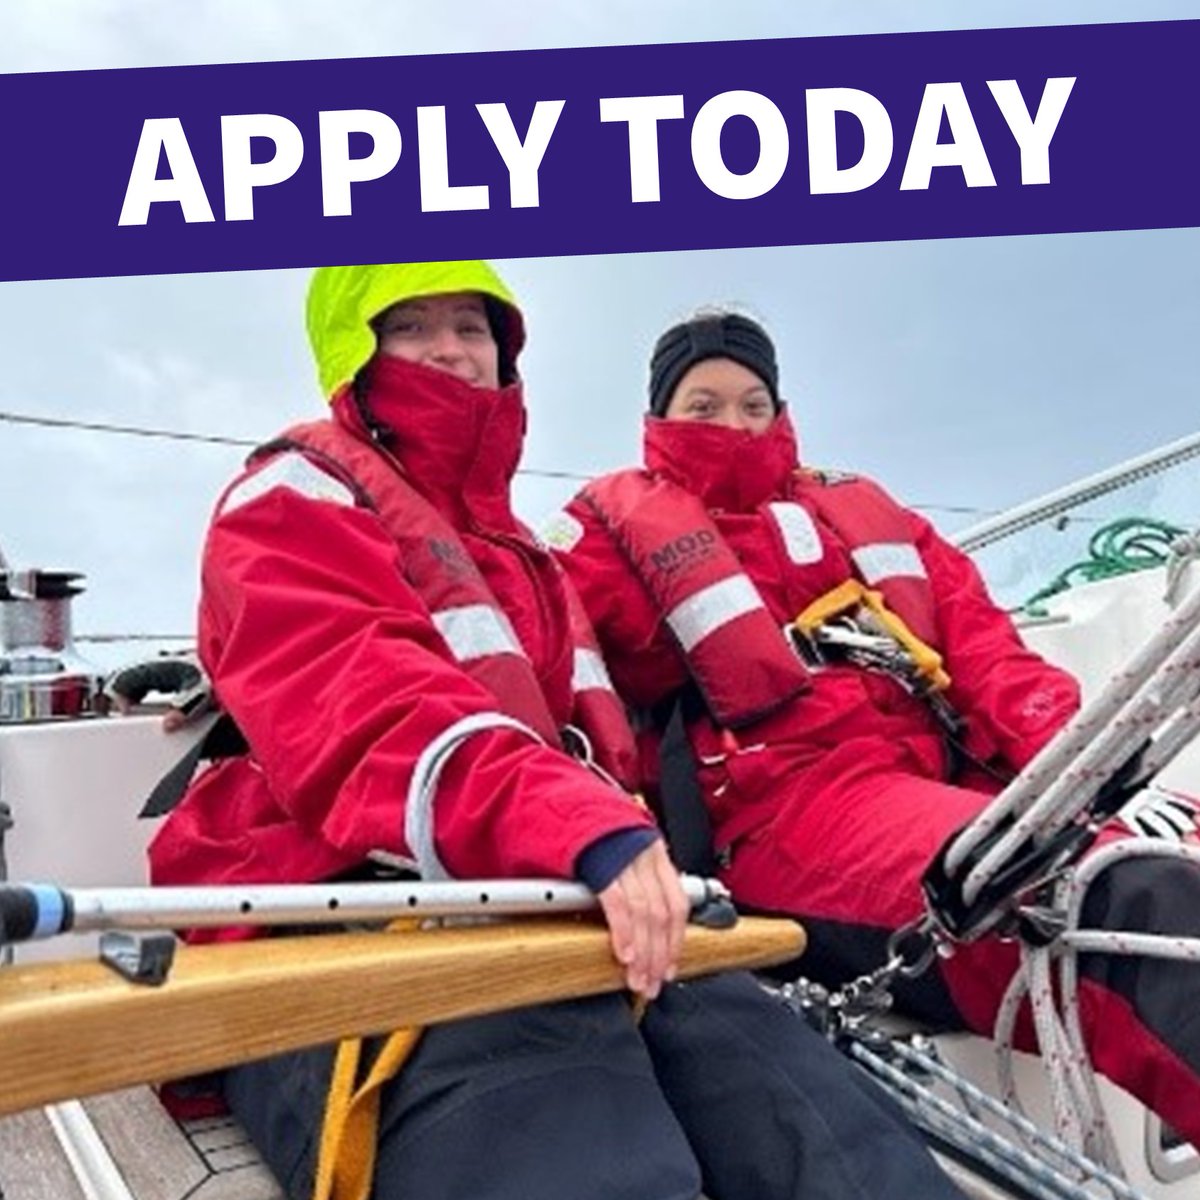 The Ulysses Trust awards grants to support reservist, officer cadet and cadet expeditions in the UK and overseas. So if you're planning an adventure why not apply today? ulyssestrust.co.uk/grant-applicat…